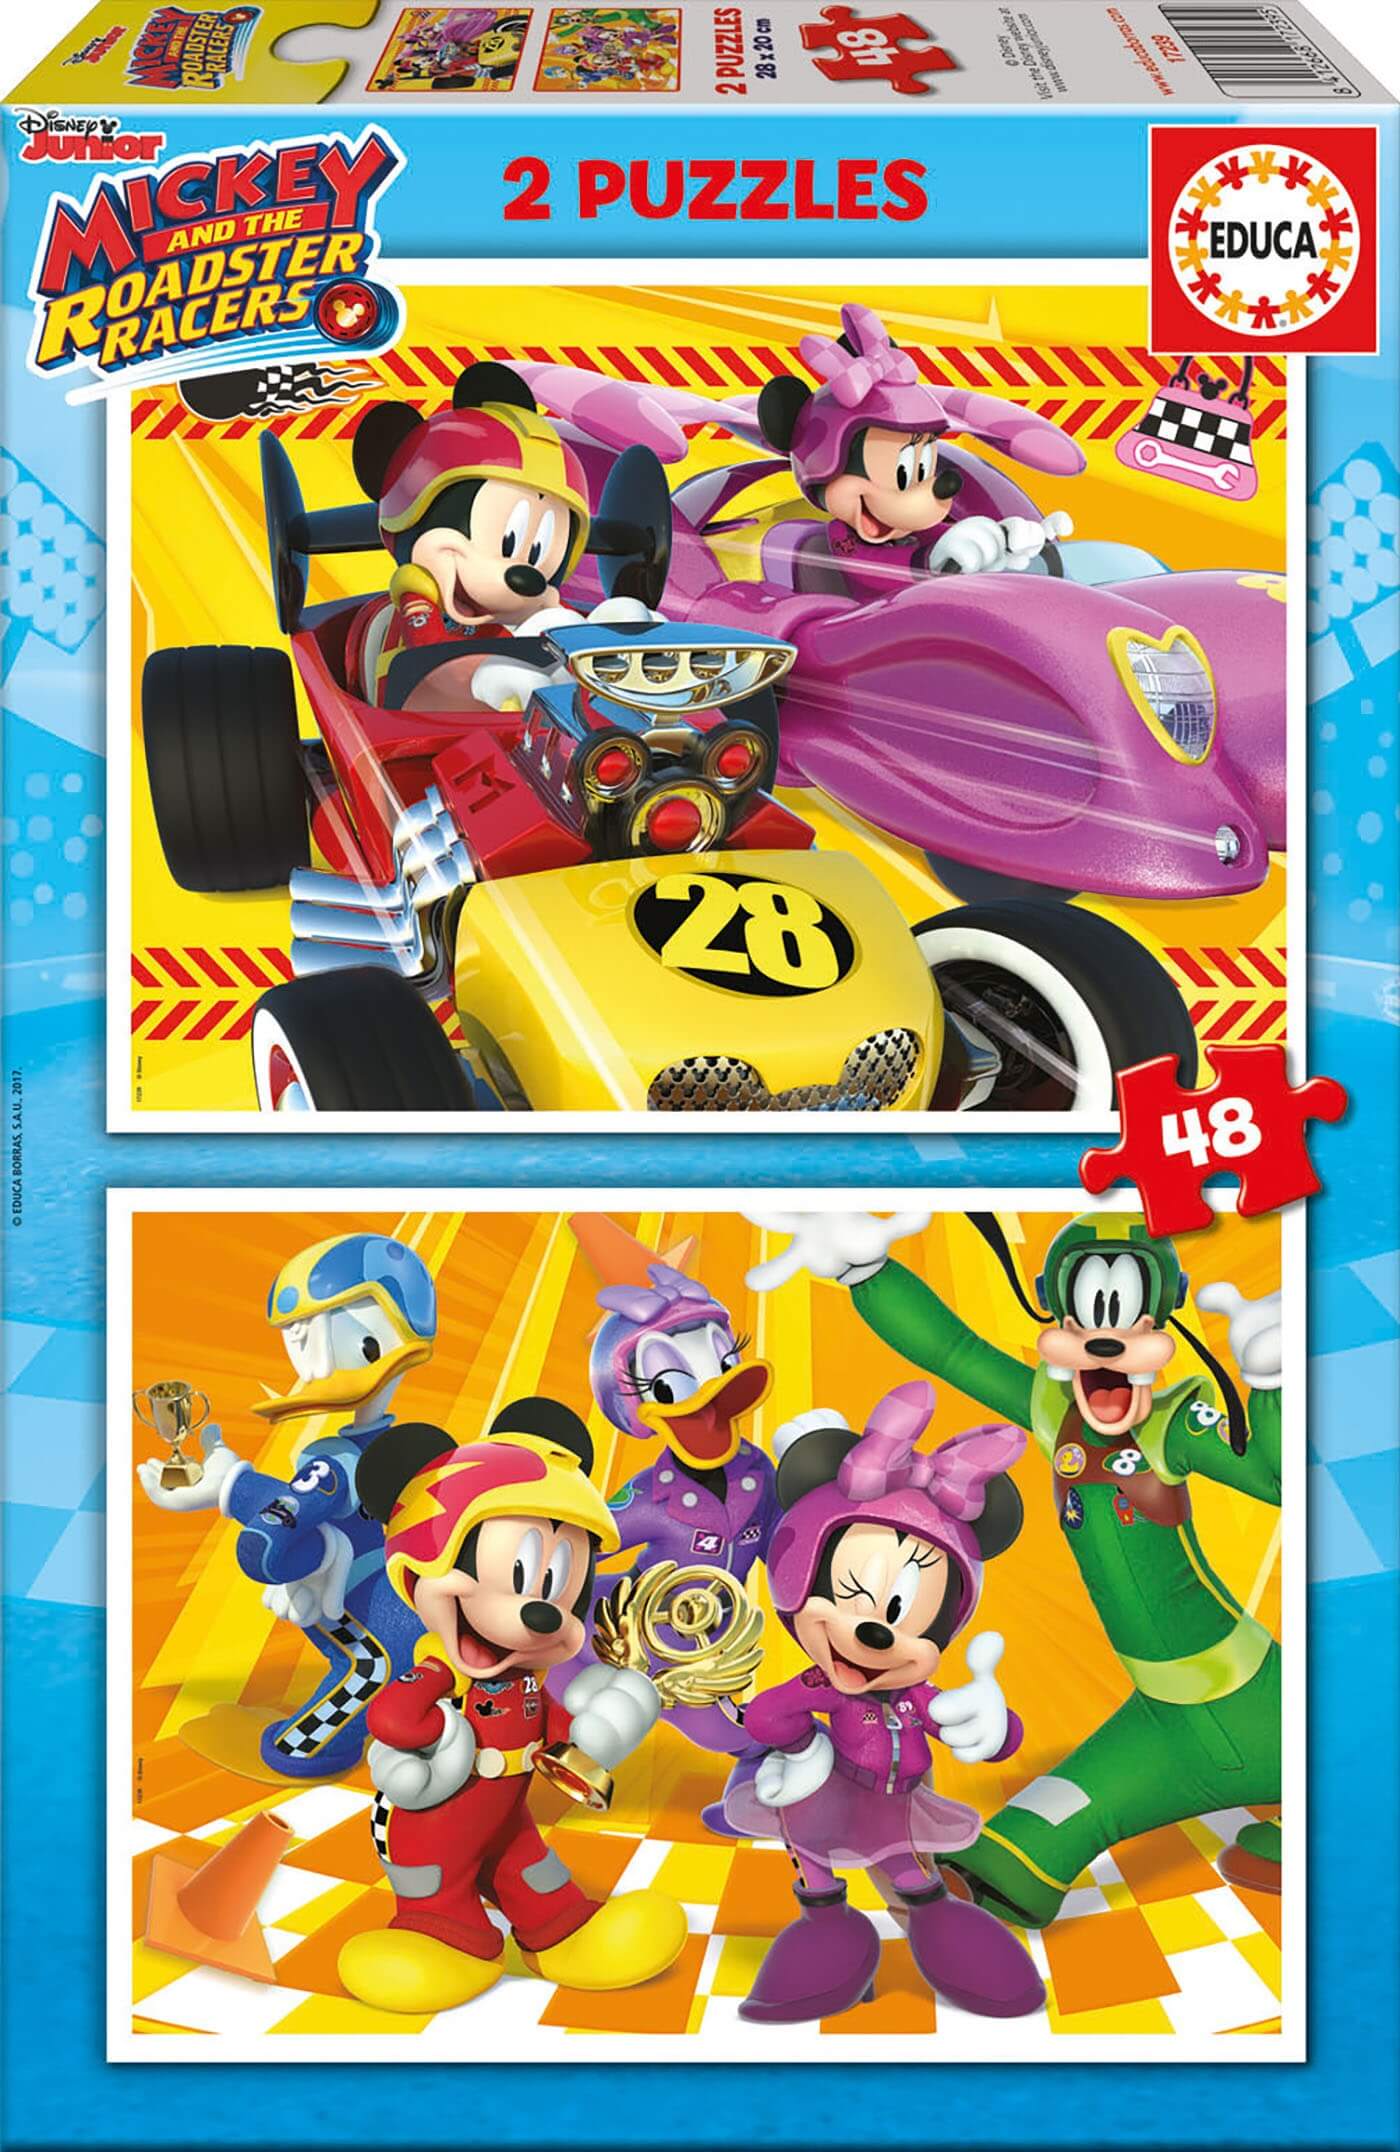 2X48 MICKEY ROADSTER RACERS 17239